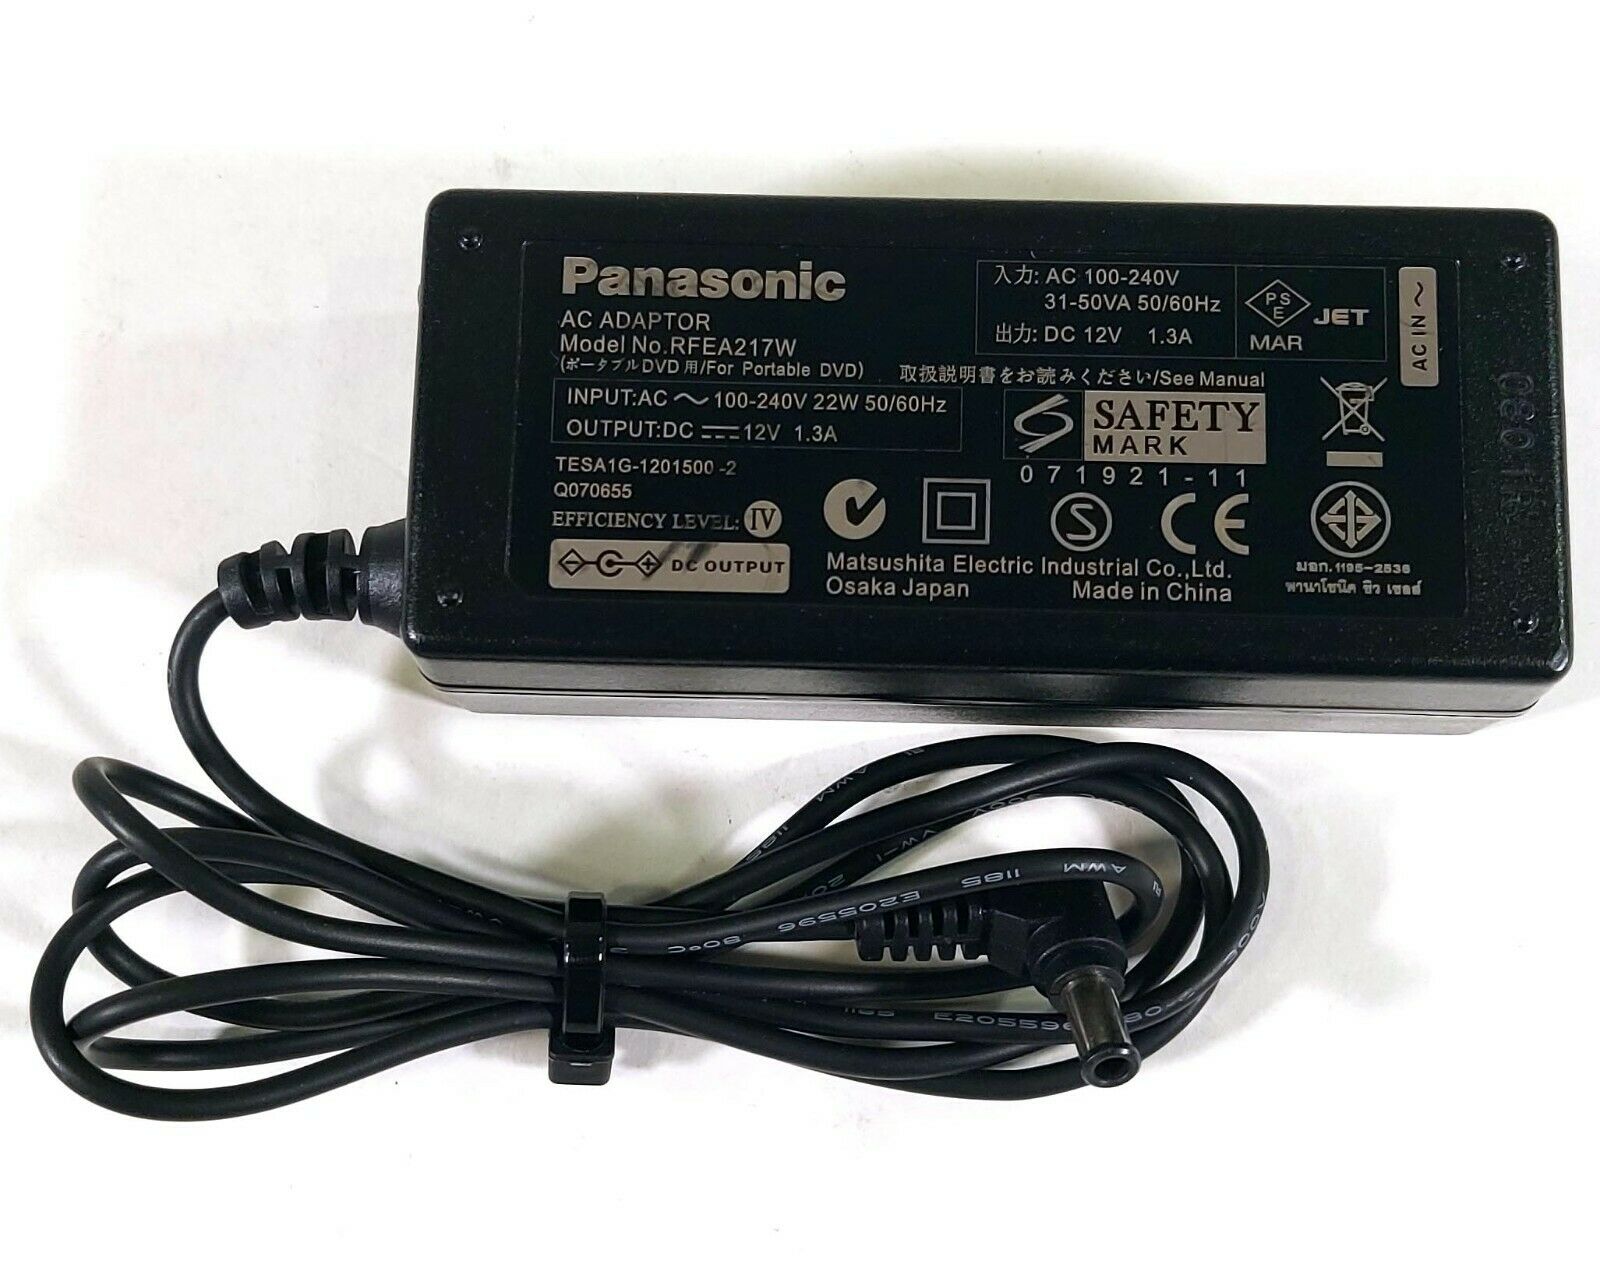 Panasonic RFEA217W AC Adapter 12V 1.3A Original Charger Power Supply Unit Type: Unit Compatible Brand: For Panasonic - Click Image to Close